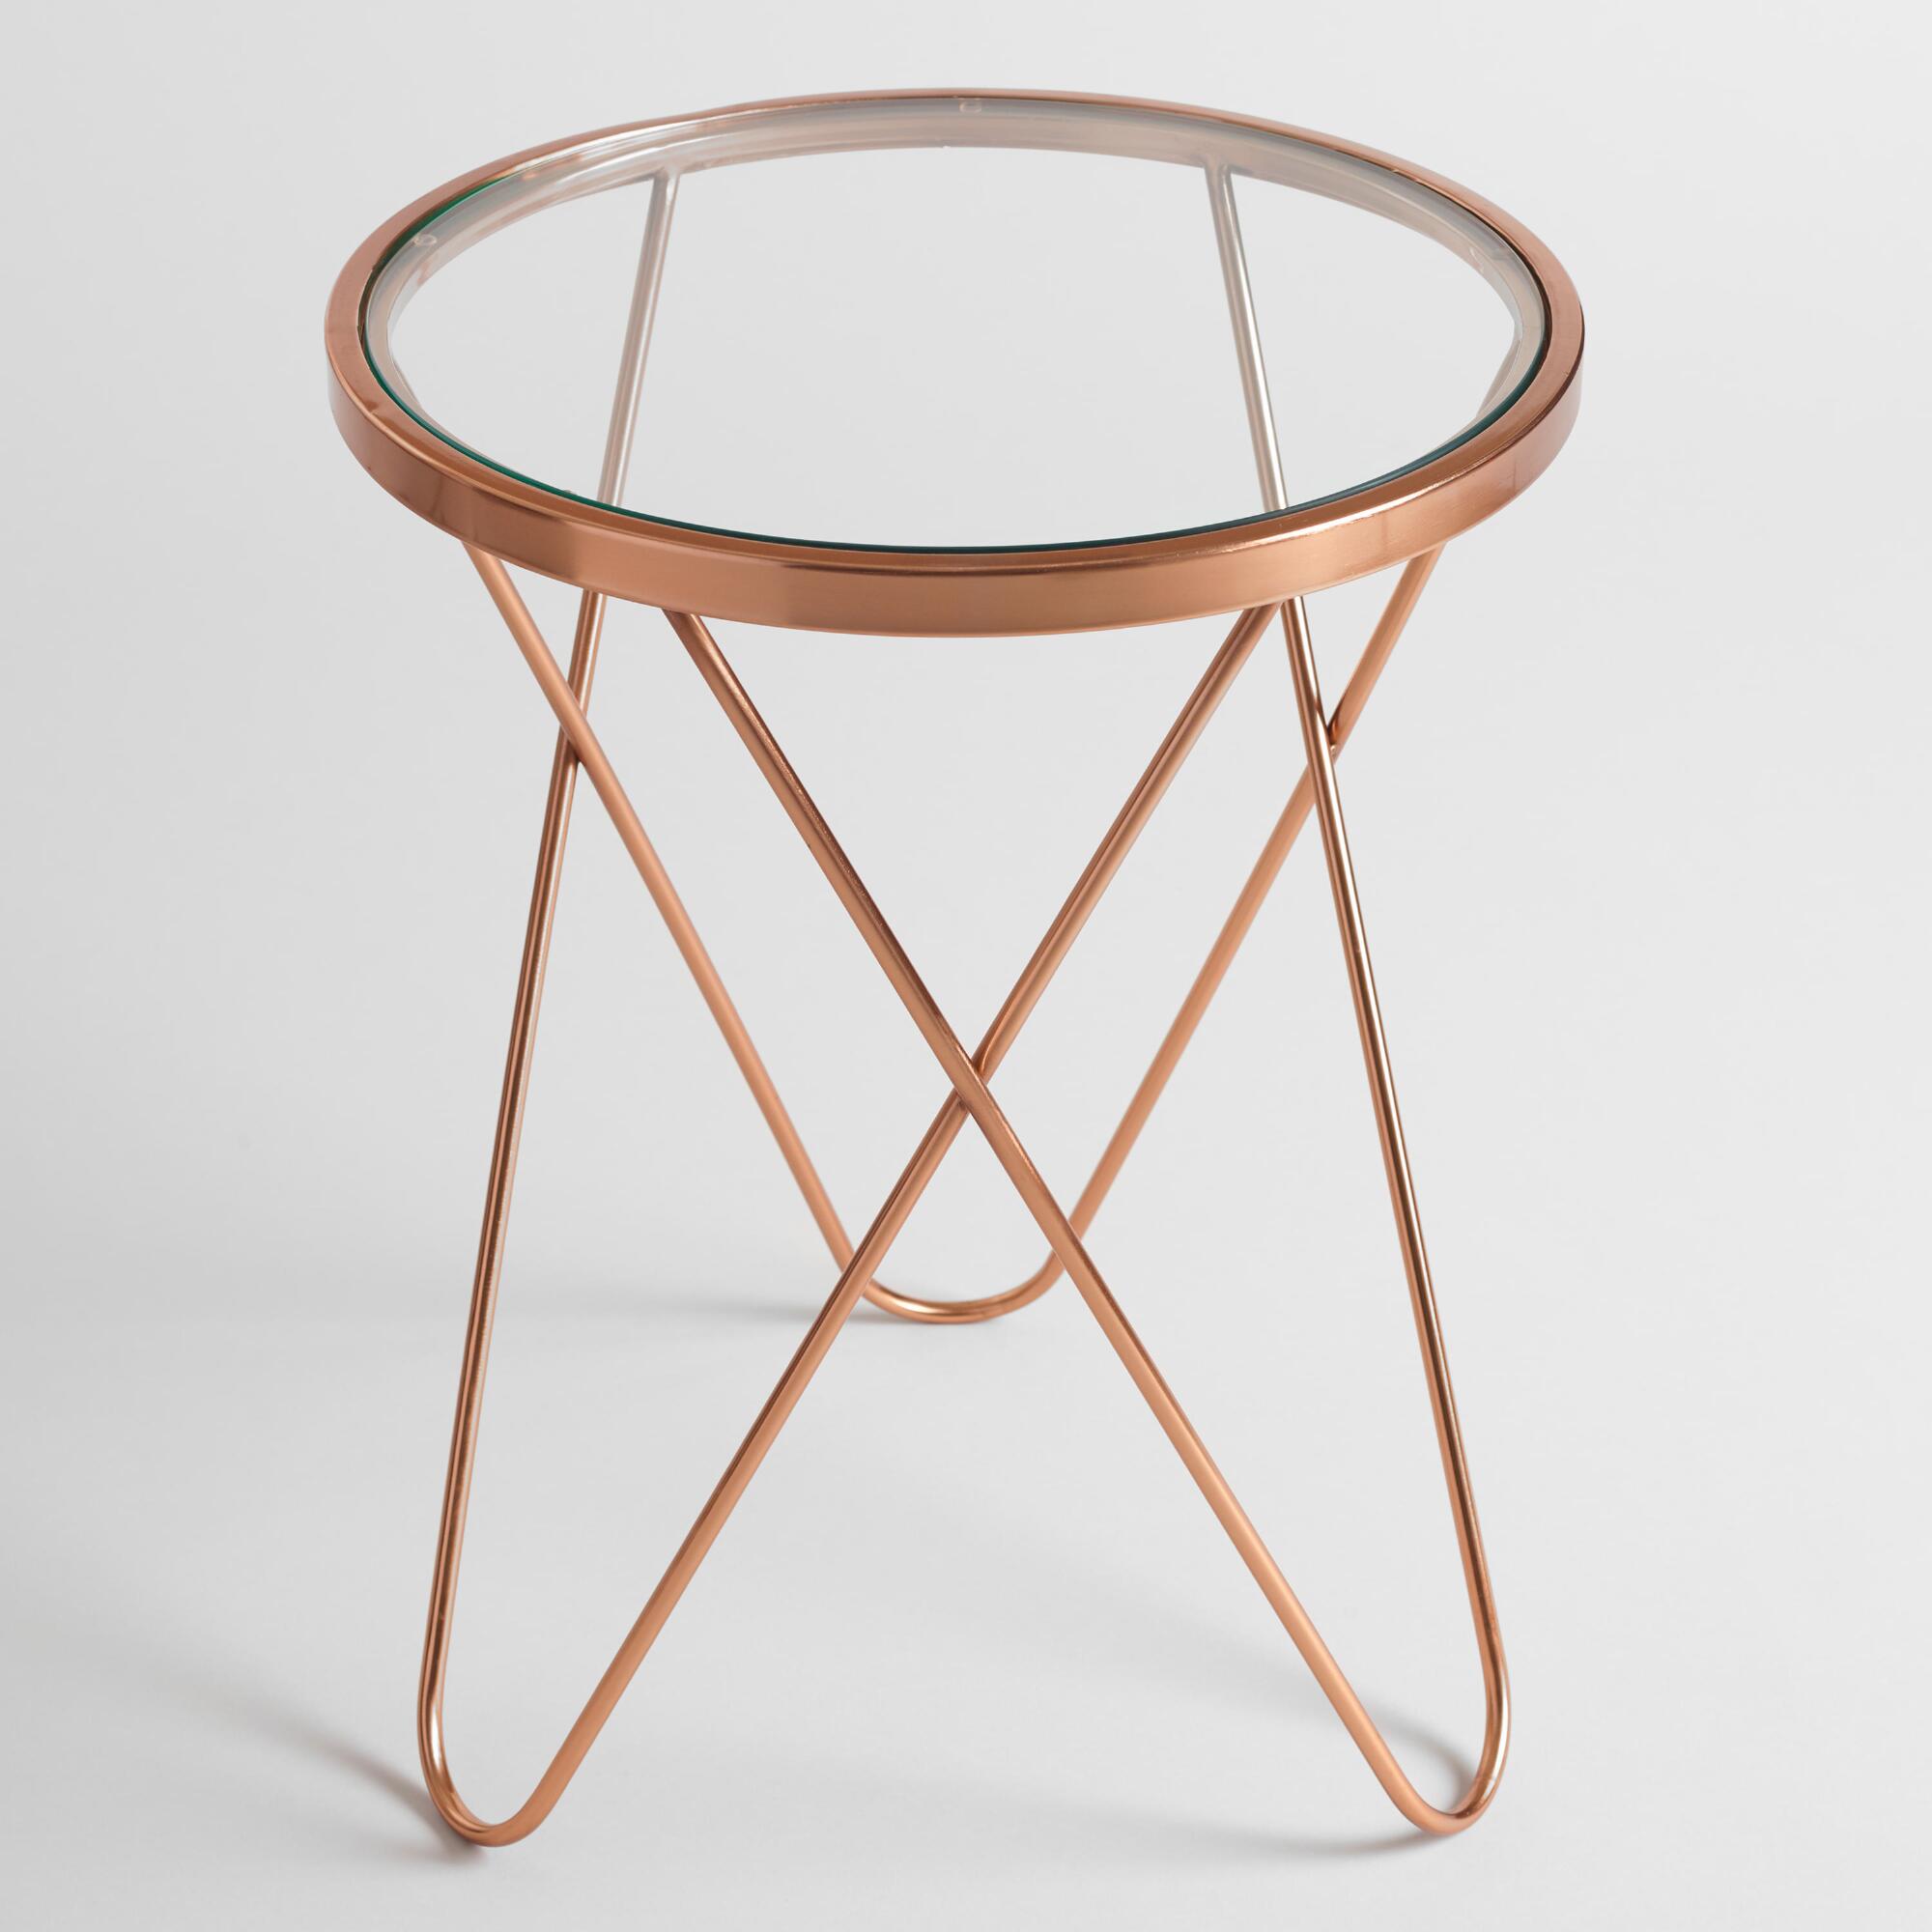 half circle table the outrageous beautiful metal frame end rose gold tomlin accent with glass top world market iipsrv fcgi best lamps solid wood nightstand seater dining center